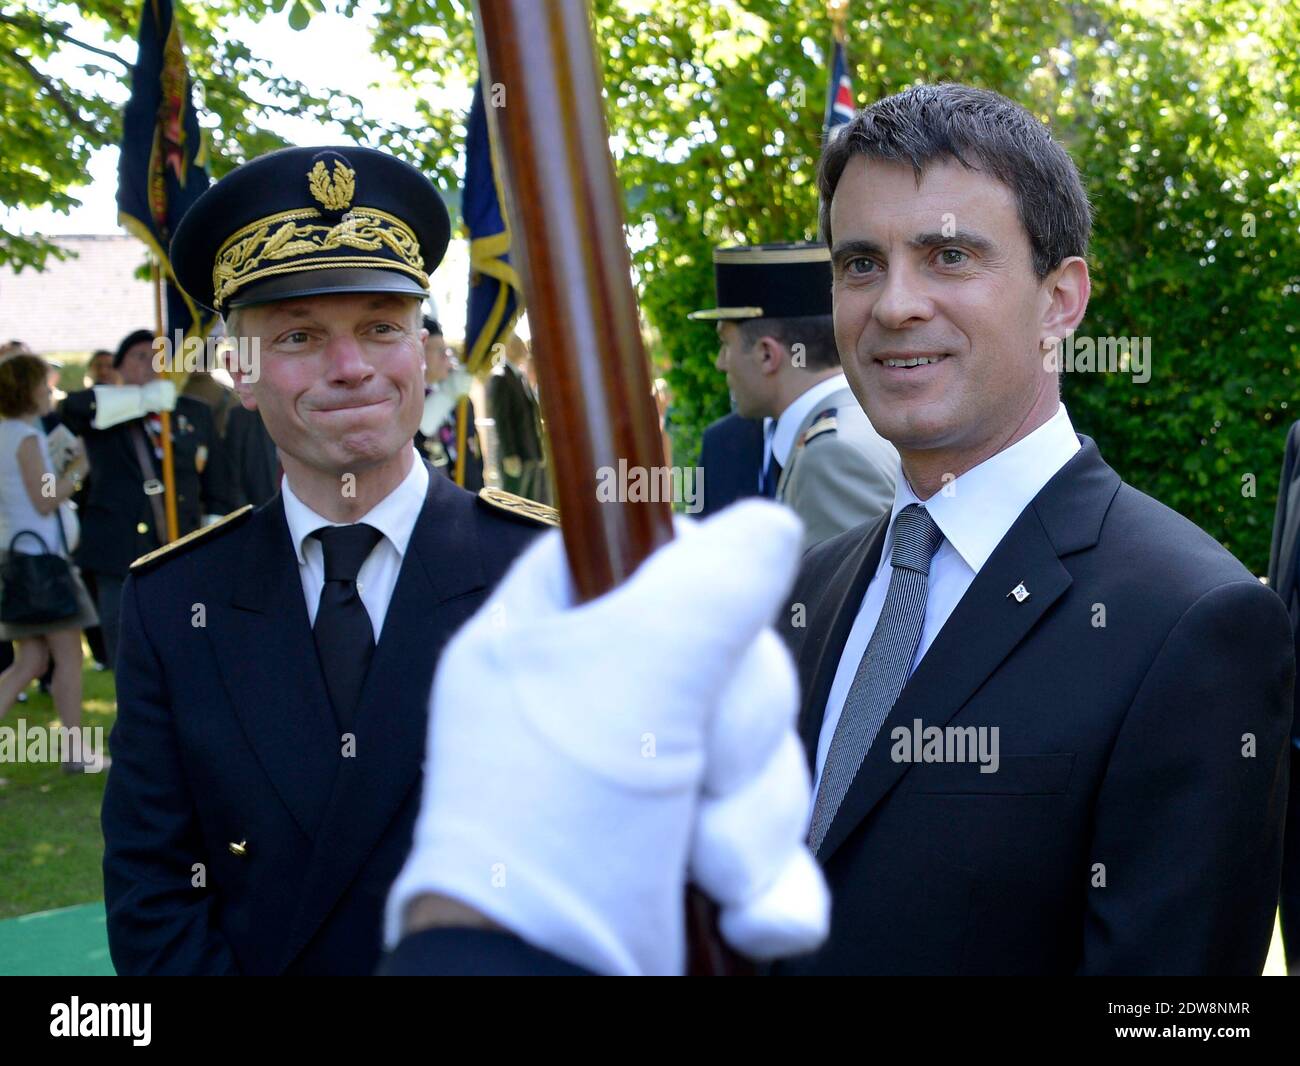 French Prime Minister Manuel Valls attend the bi-national France-UK ceremony at the Commonwealth War Graves Cemetery in Bayeux, as part of the official ceremonies on the occasion of the D-Day 70th Anniversary, on June 6, 2014 in Normandy, France. Photo by Abd Rabbo-Bernard-Gouhier-Mousse/ABACAPRESS.COM Stock Photo